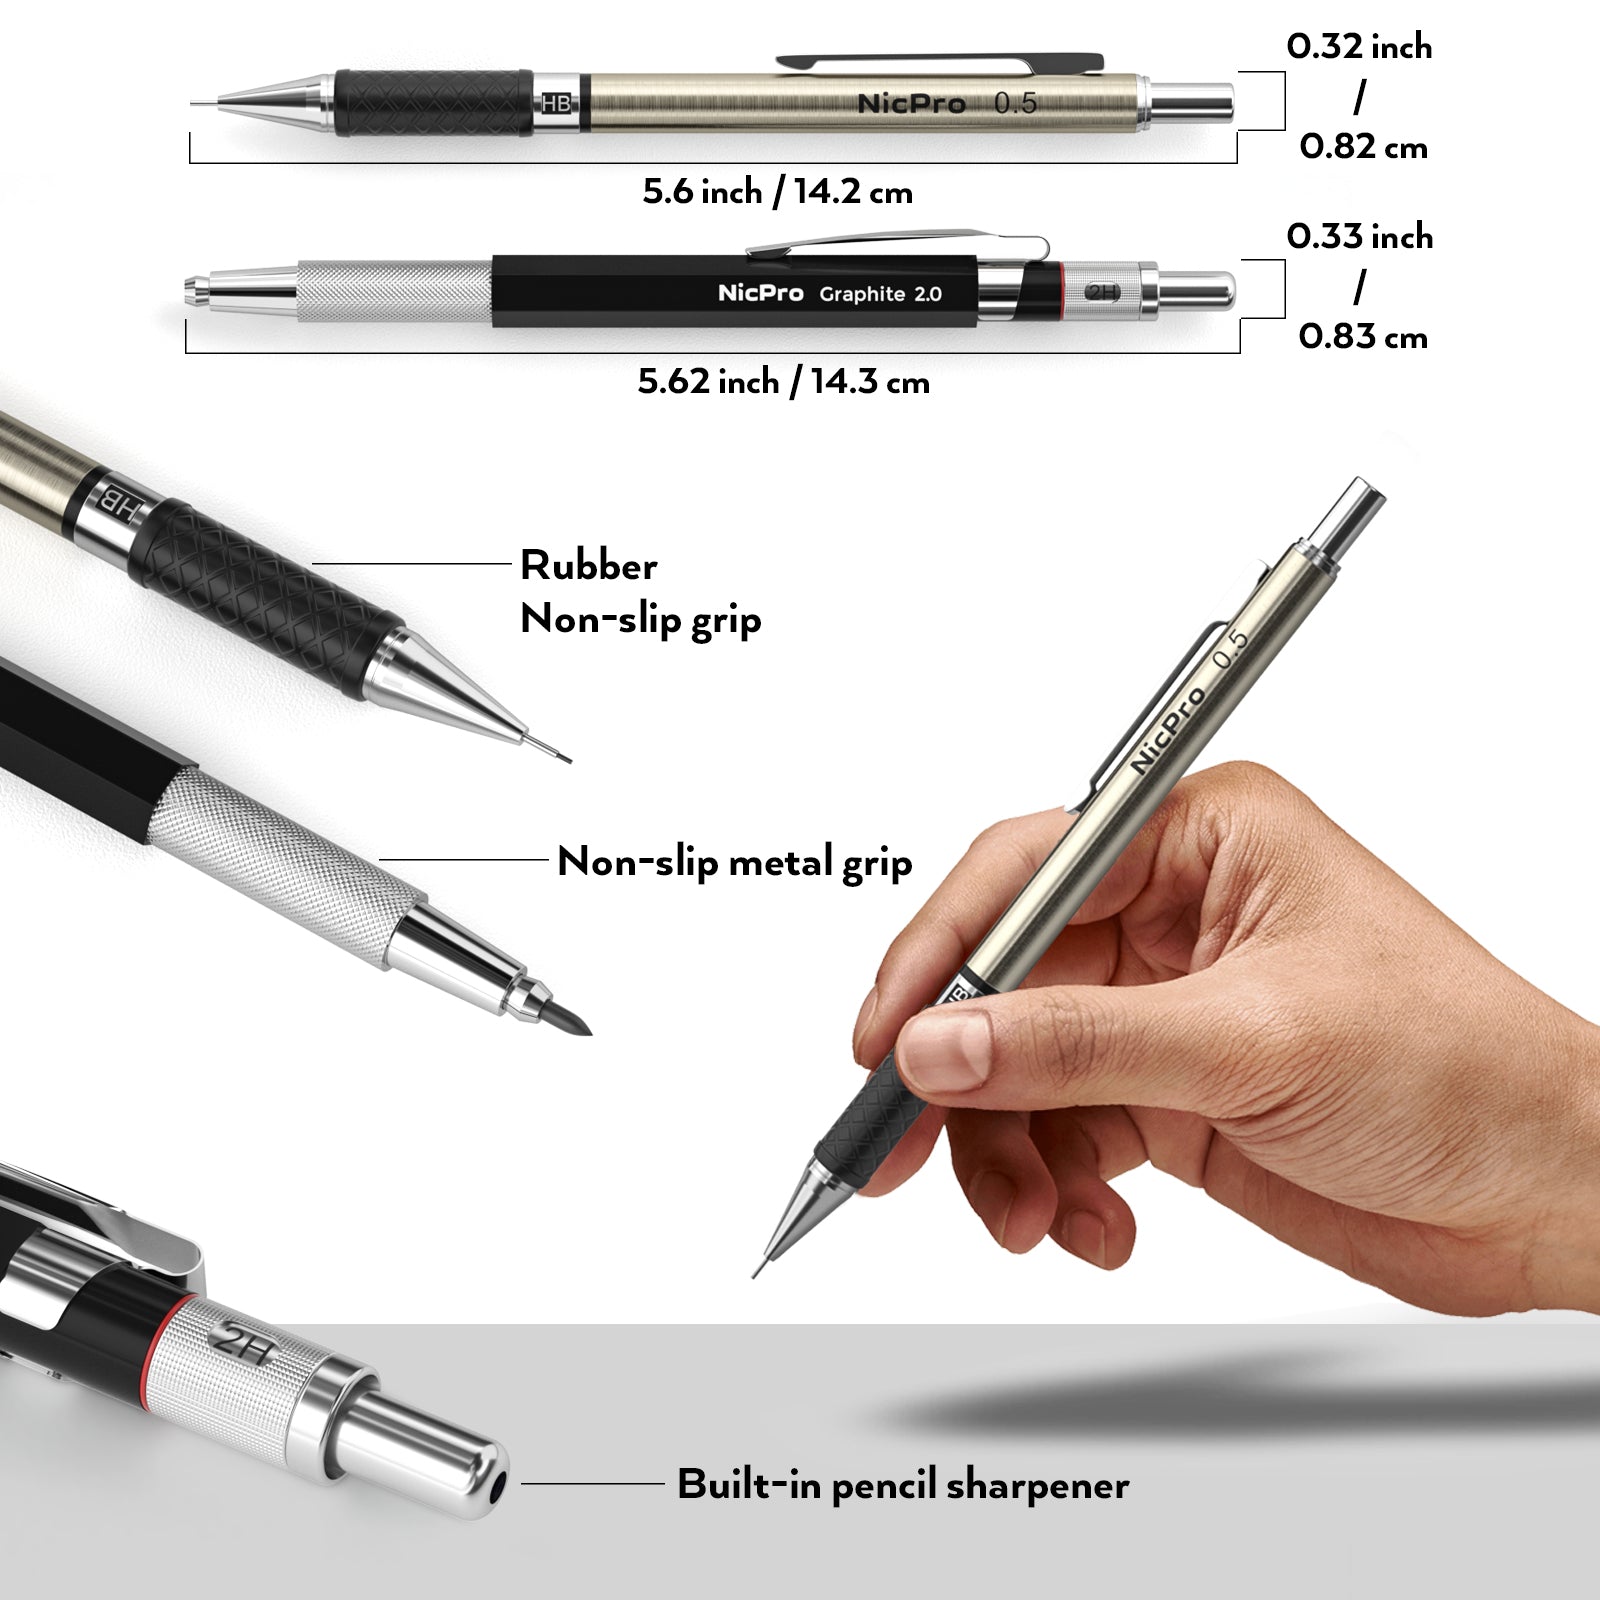 Nicpro 6PCS Art Mechanical Pencils Set, 3 PCS Metal Drafting Pencil 0.5 mm & 0.7 mm & 0.9 mm and 3 PCS 2mm Graphite Lead Holder (2B HB 2H) For Writing,Sketching Drawing,With 12 Tubes Lead Refills